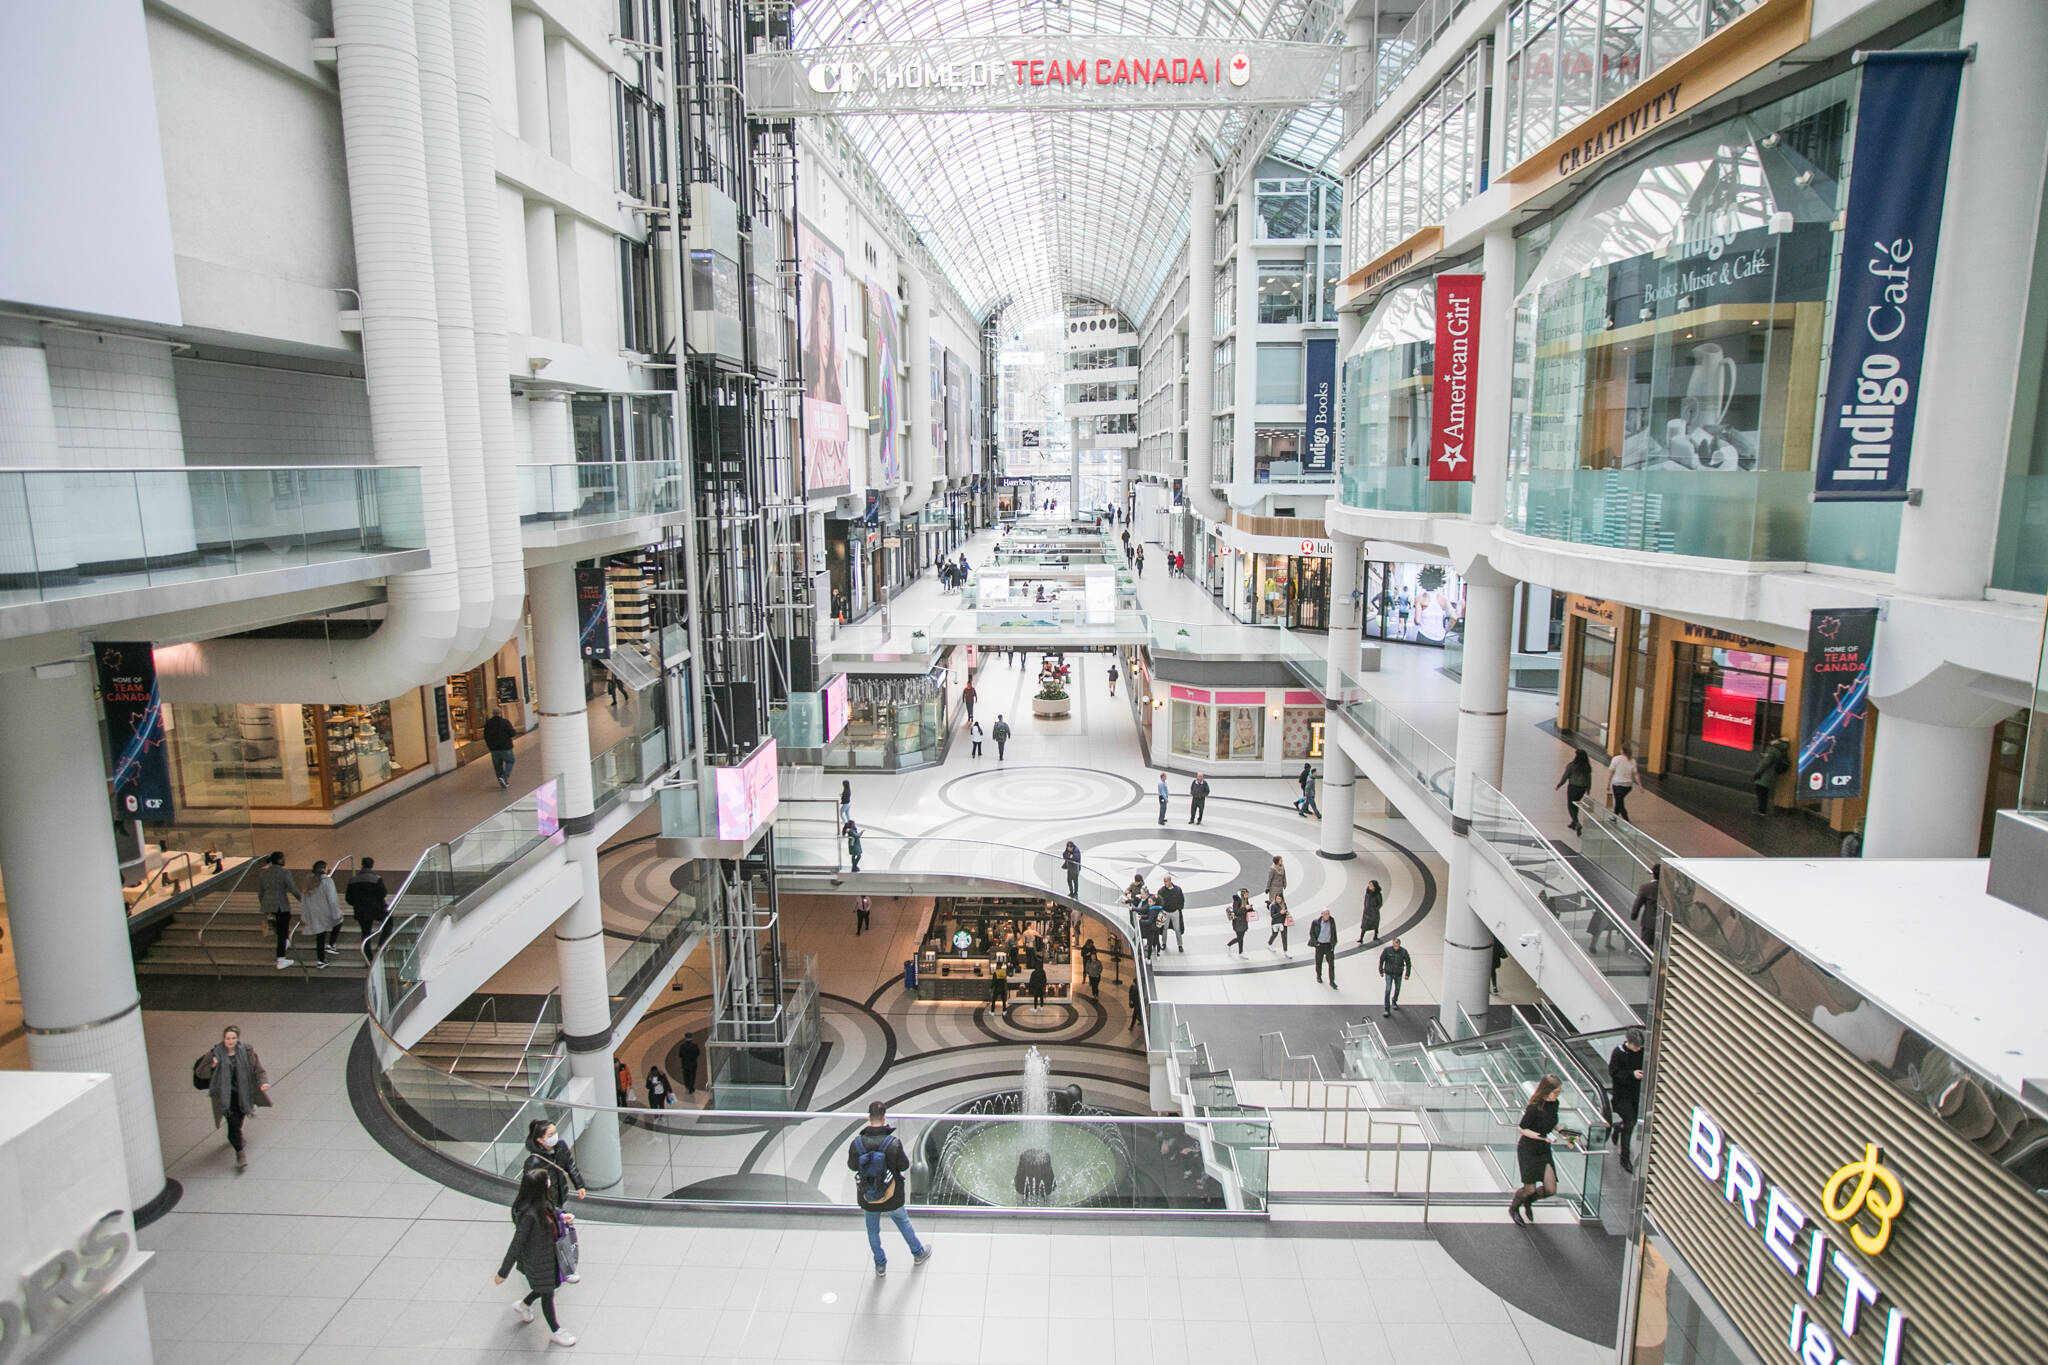 Most stores at the Toronto Eaton Centre aren't paying their rent